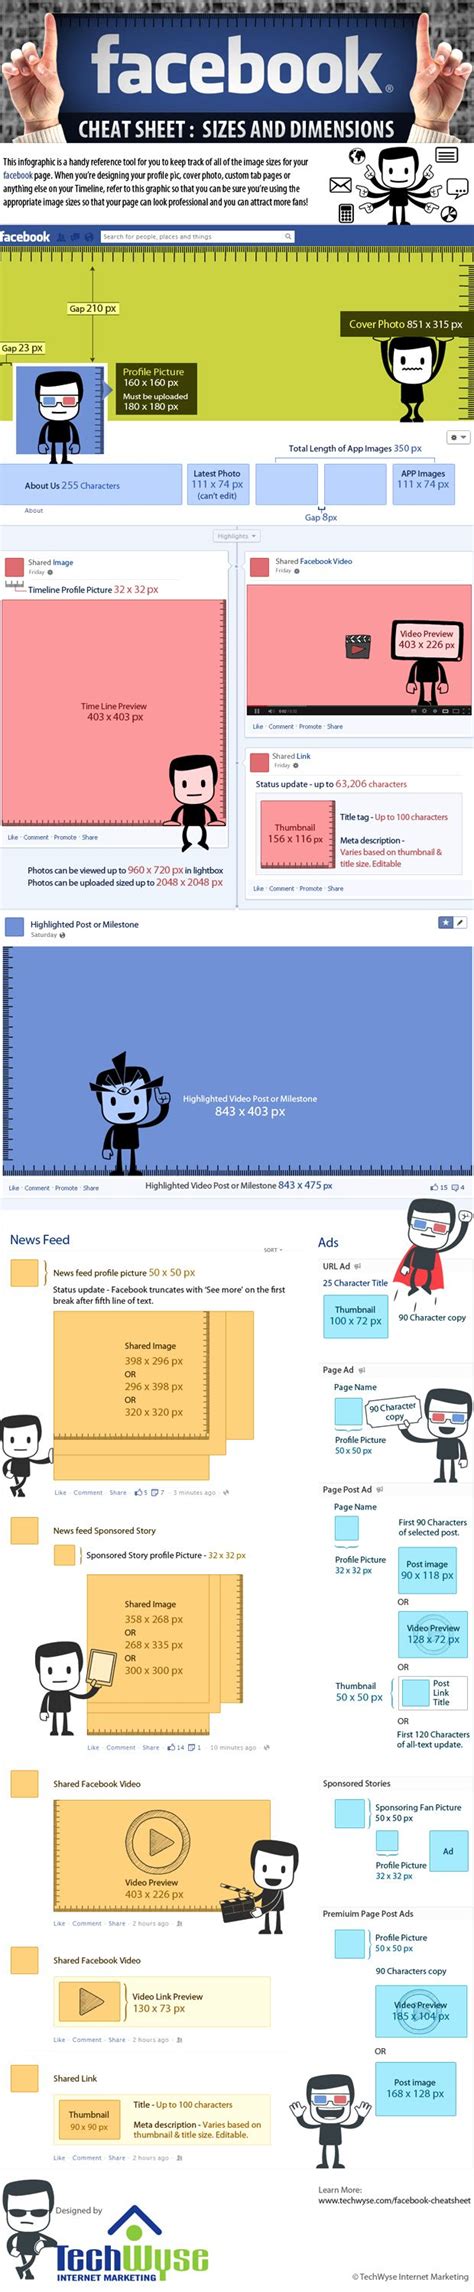 Facebook Cheat Sheet Image Size And Dimensions Facebook Image Sizes